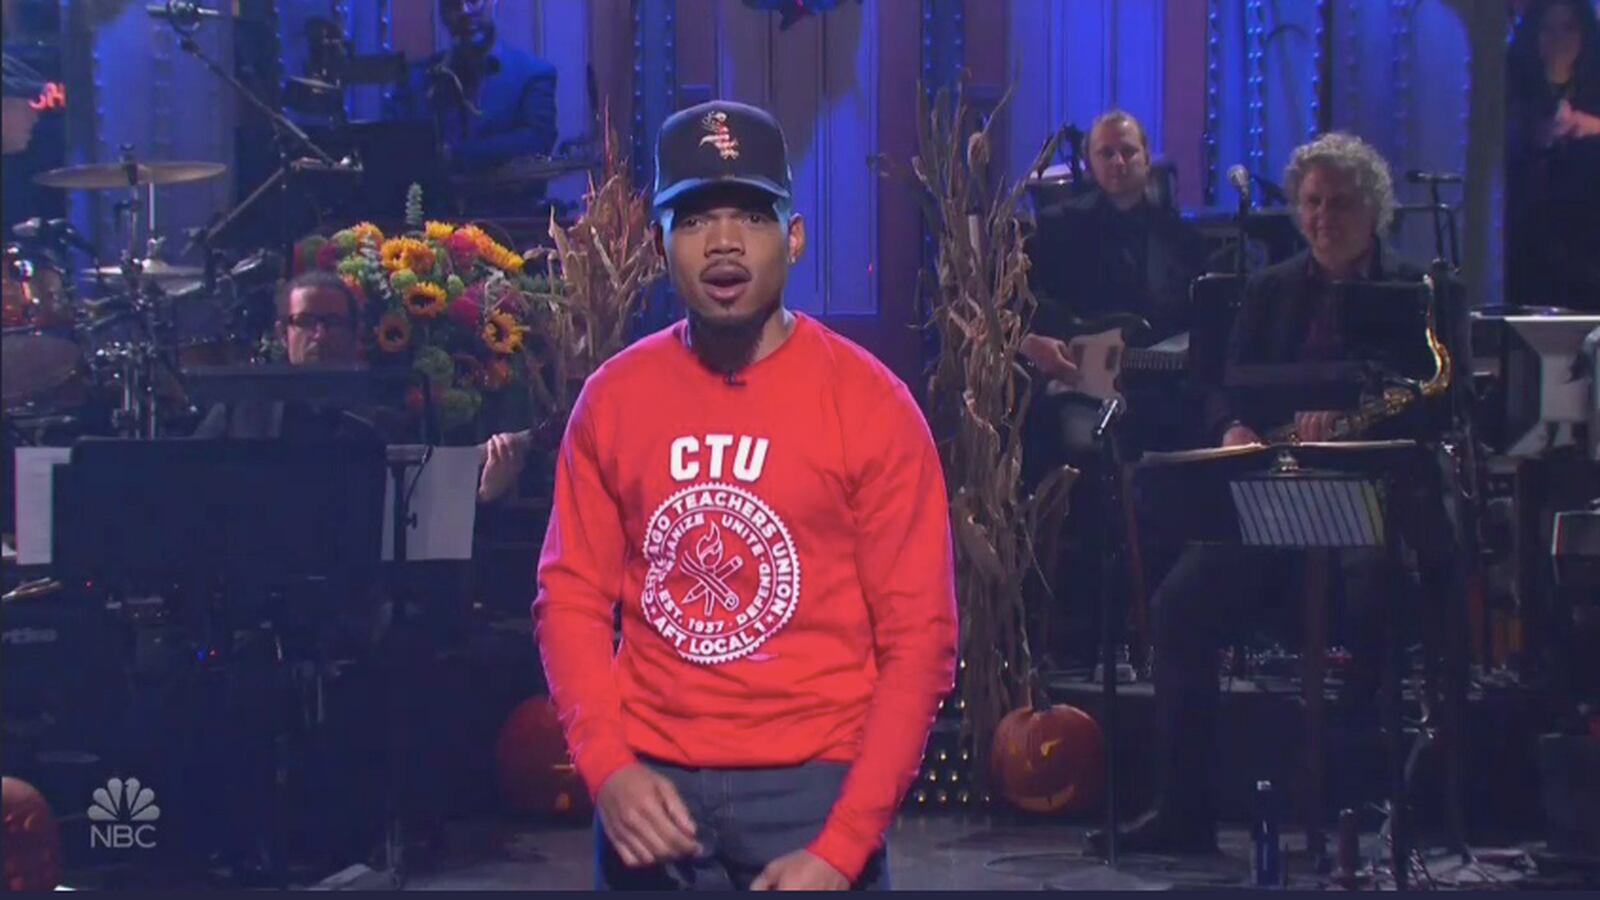 As negotiations wore into the night Saturday, homegrown hip-hop star Chance the Rapper wore a Chicago Teachers Union sweatshirt to host  Saturday Night Live.